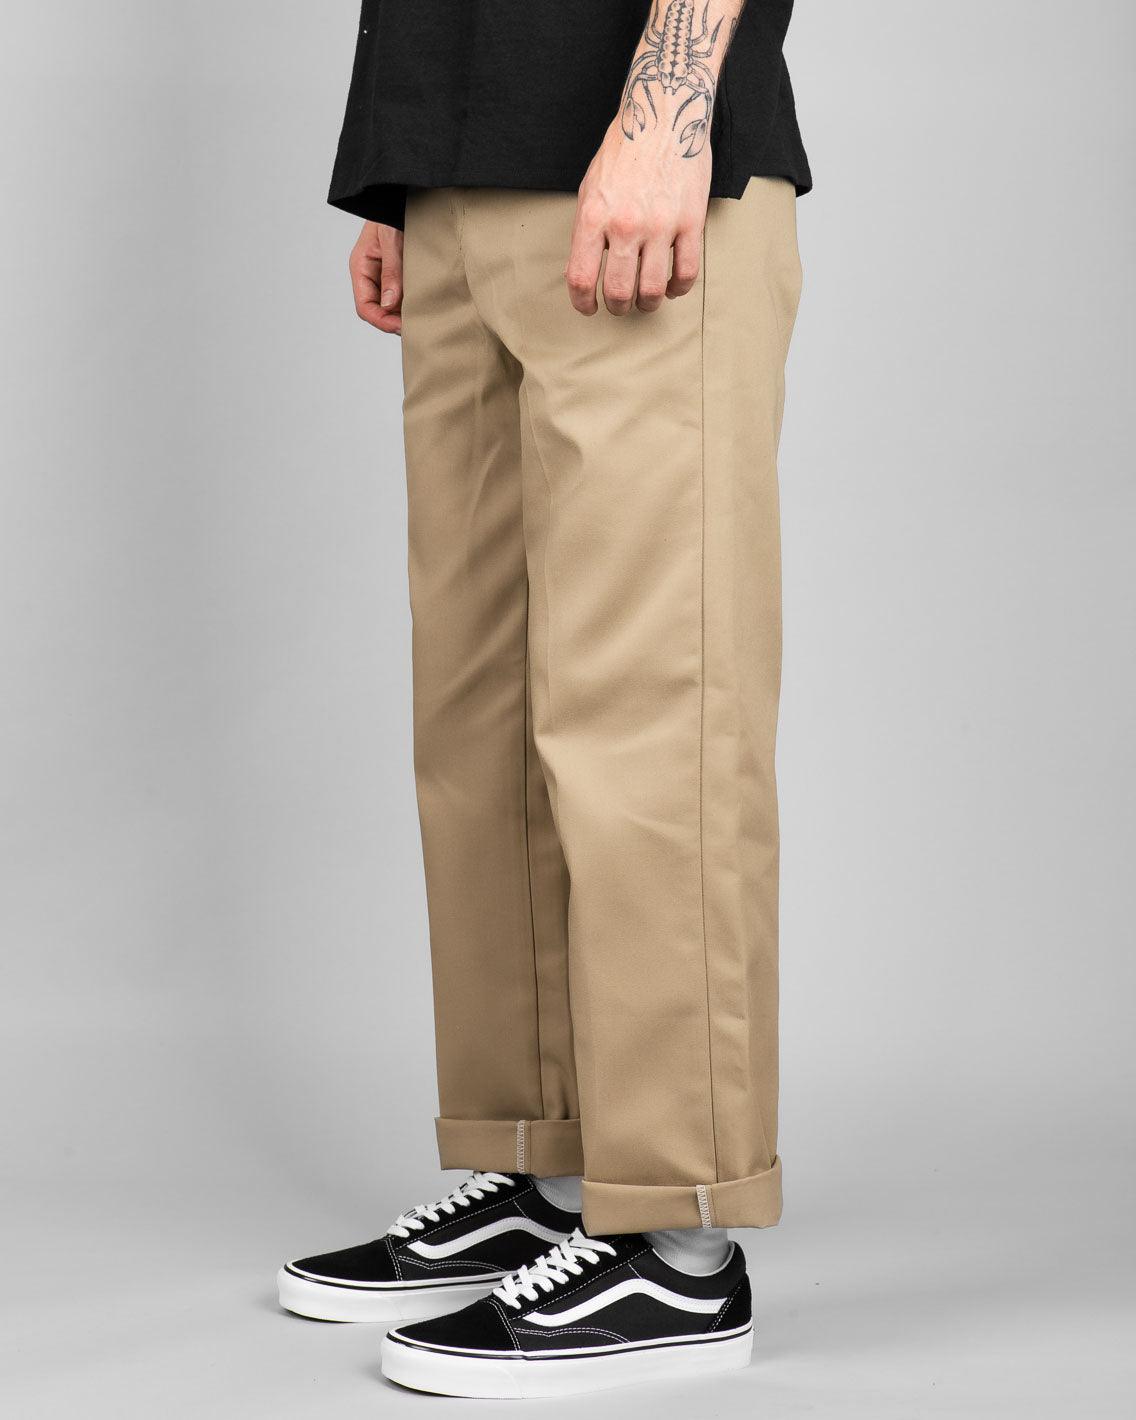 Dickies 874 Fit Work Pant in FallenFront